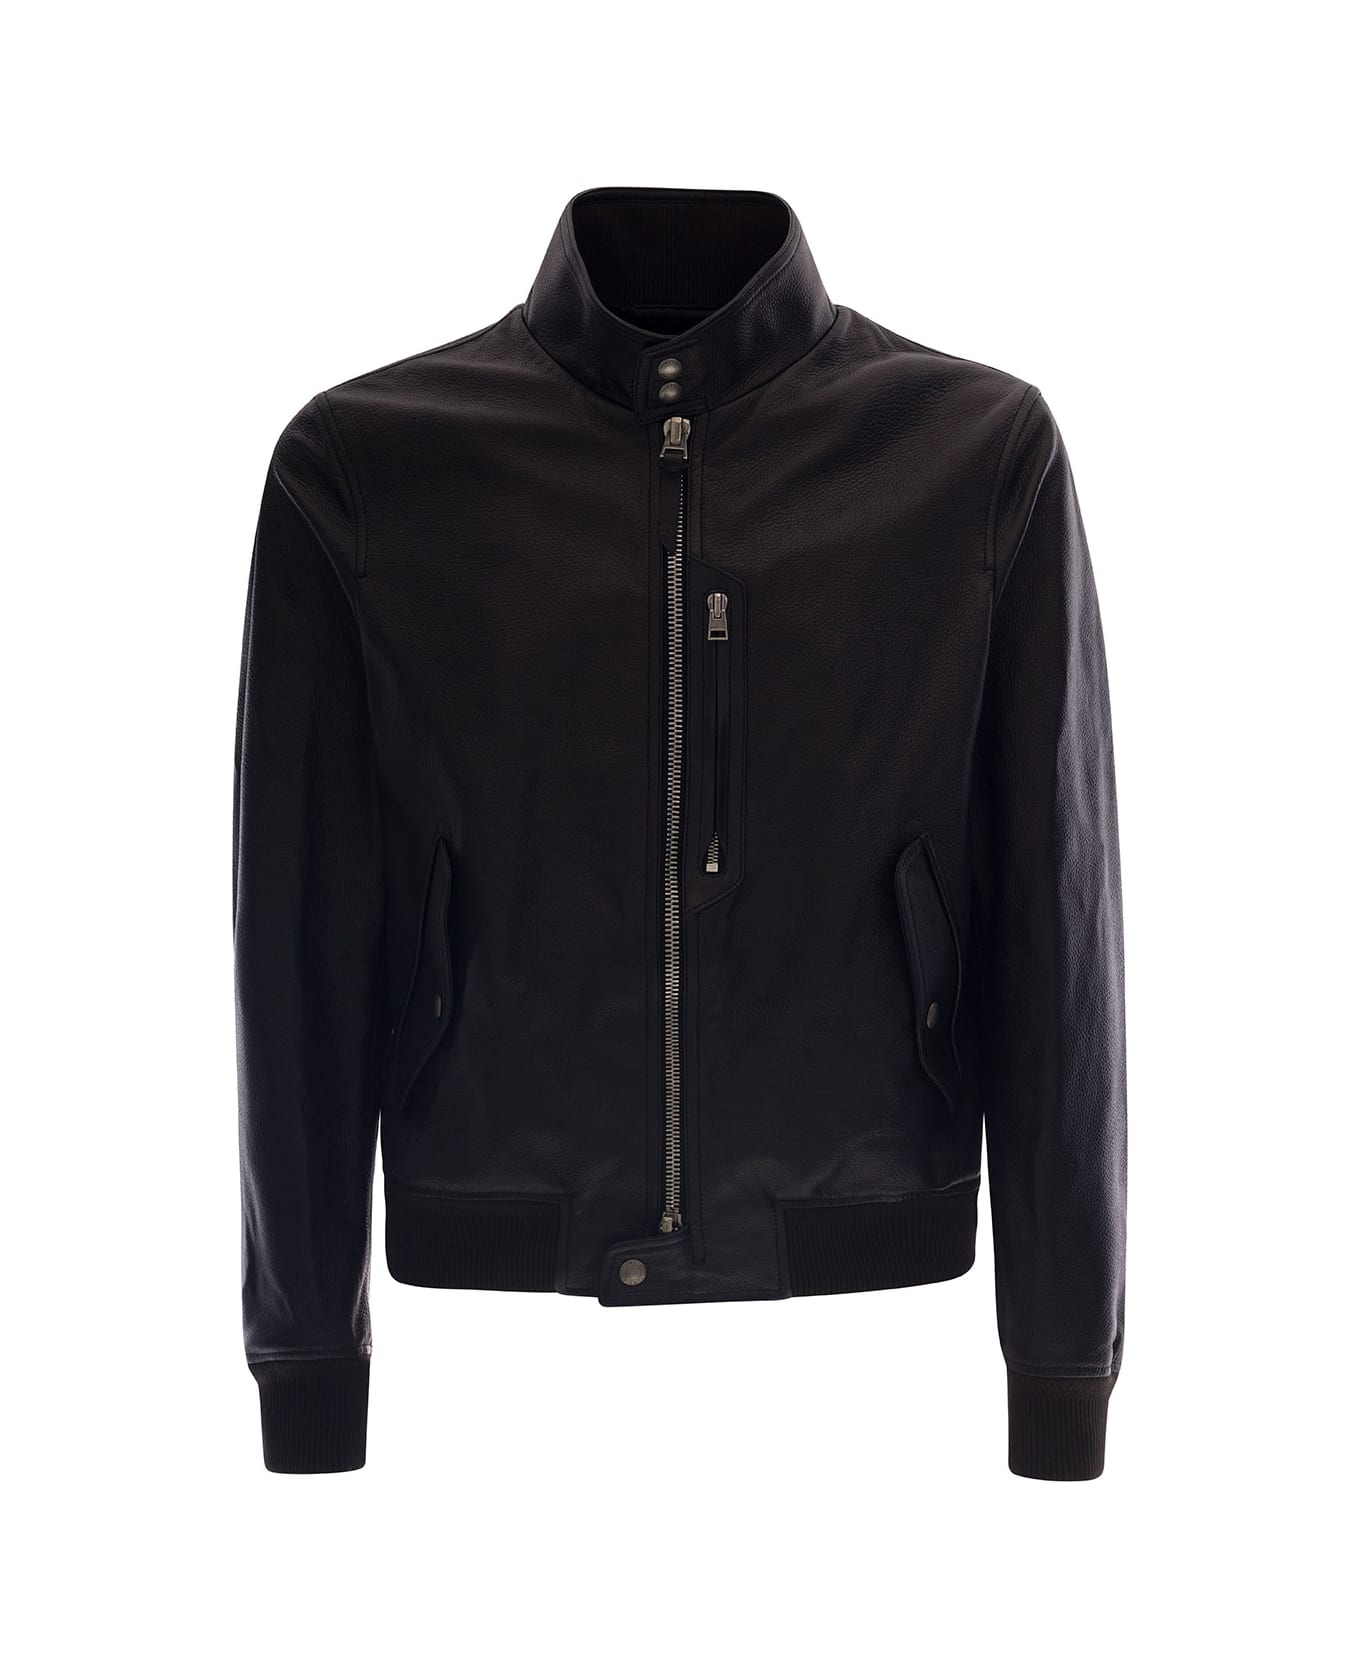 Tom Ford Black High Neck Jacket With Zip In Leather Man - Black